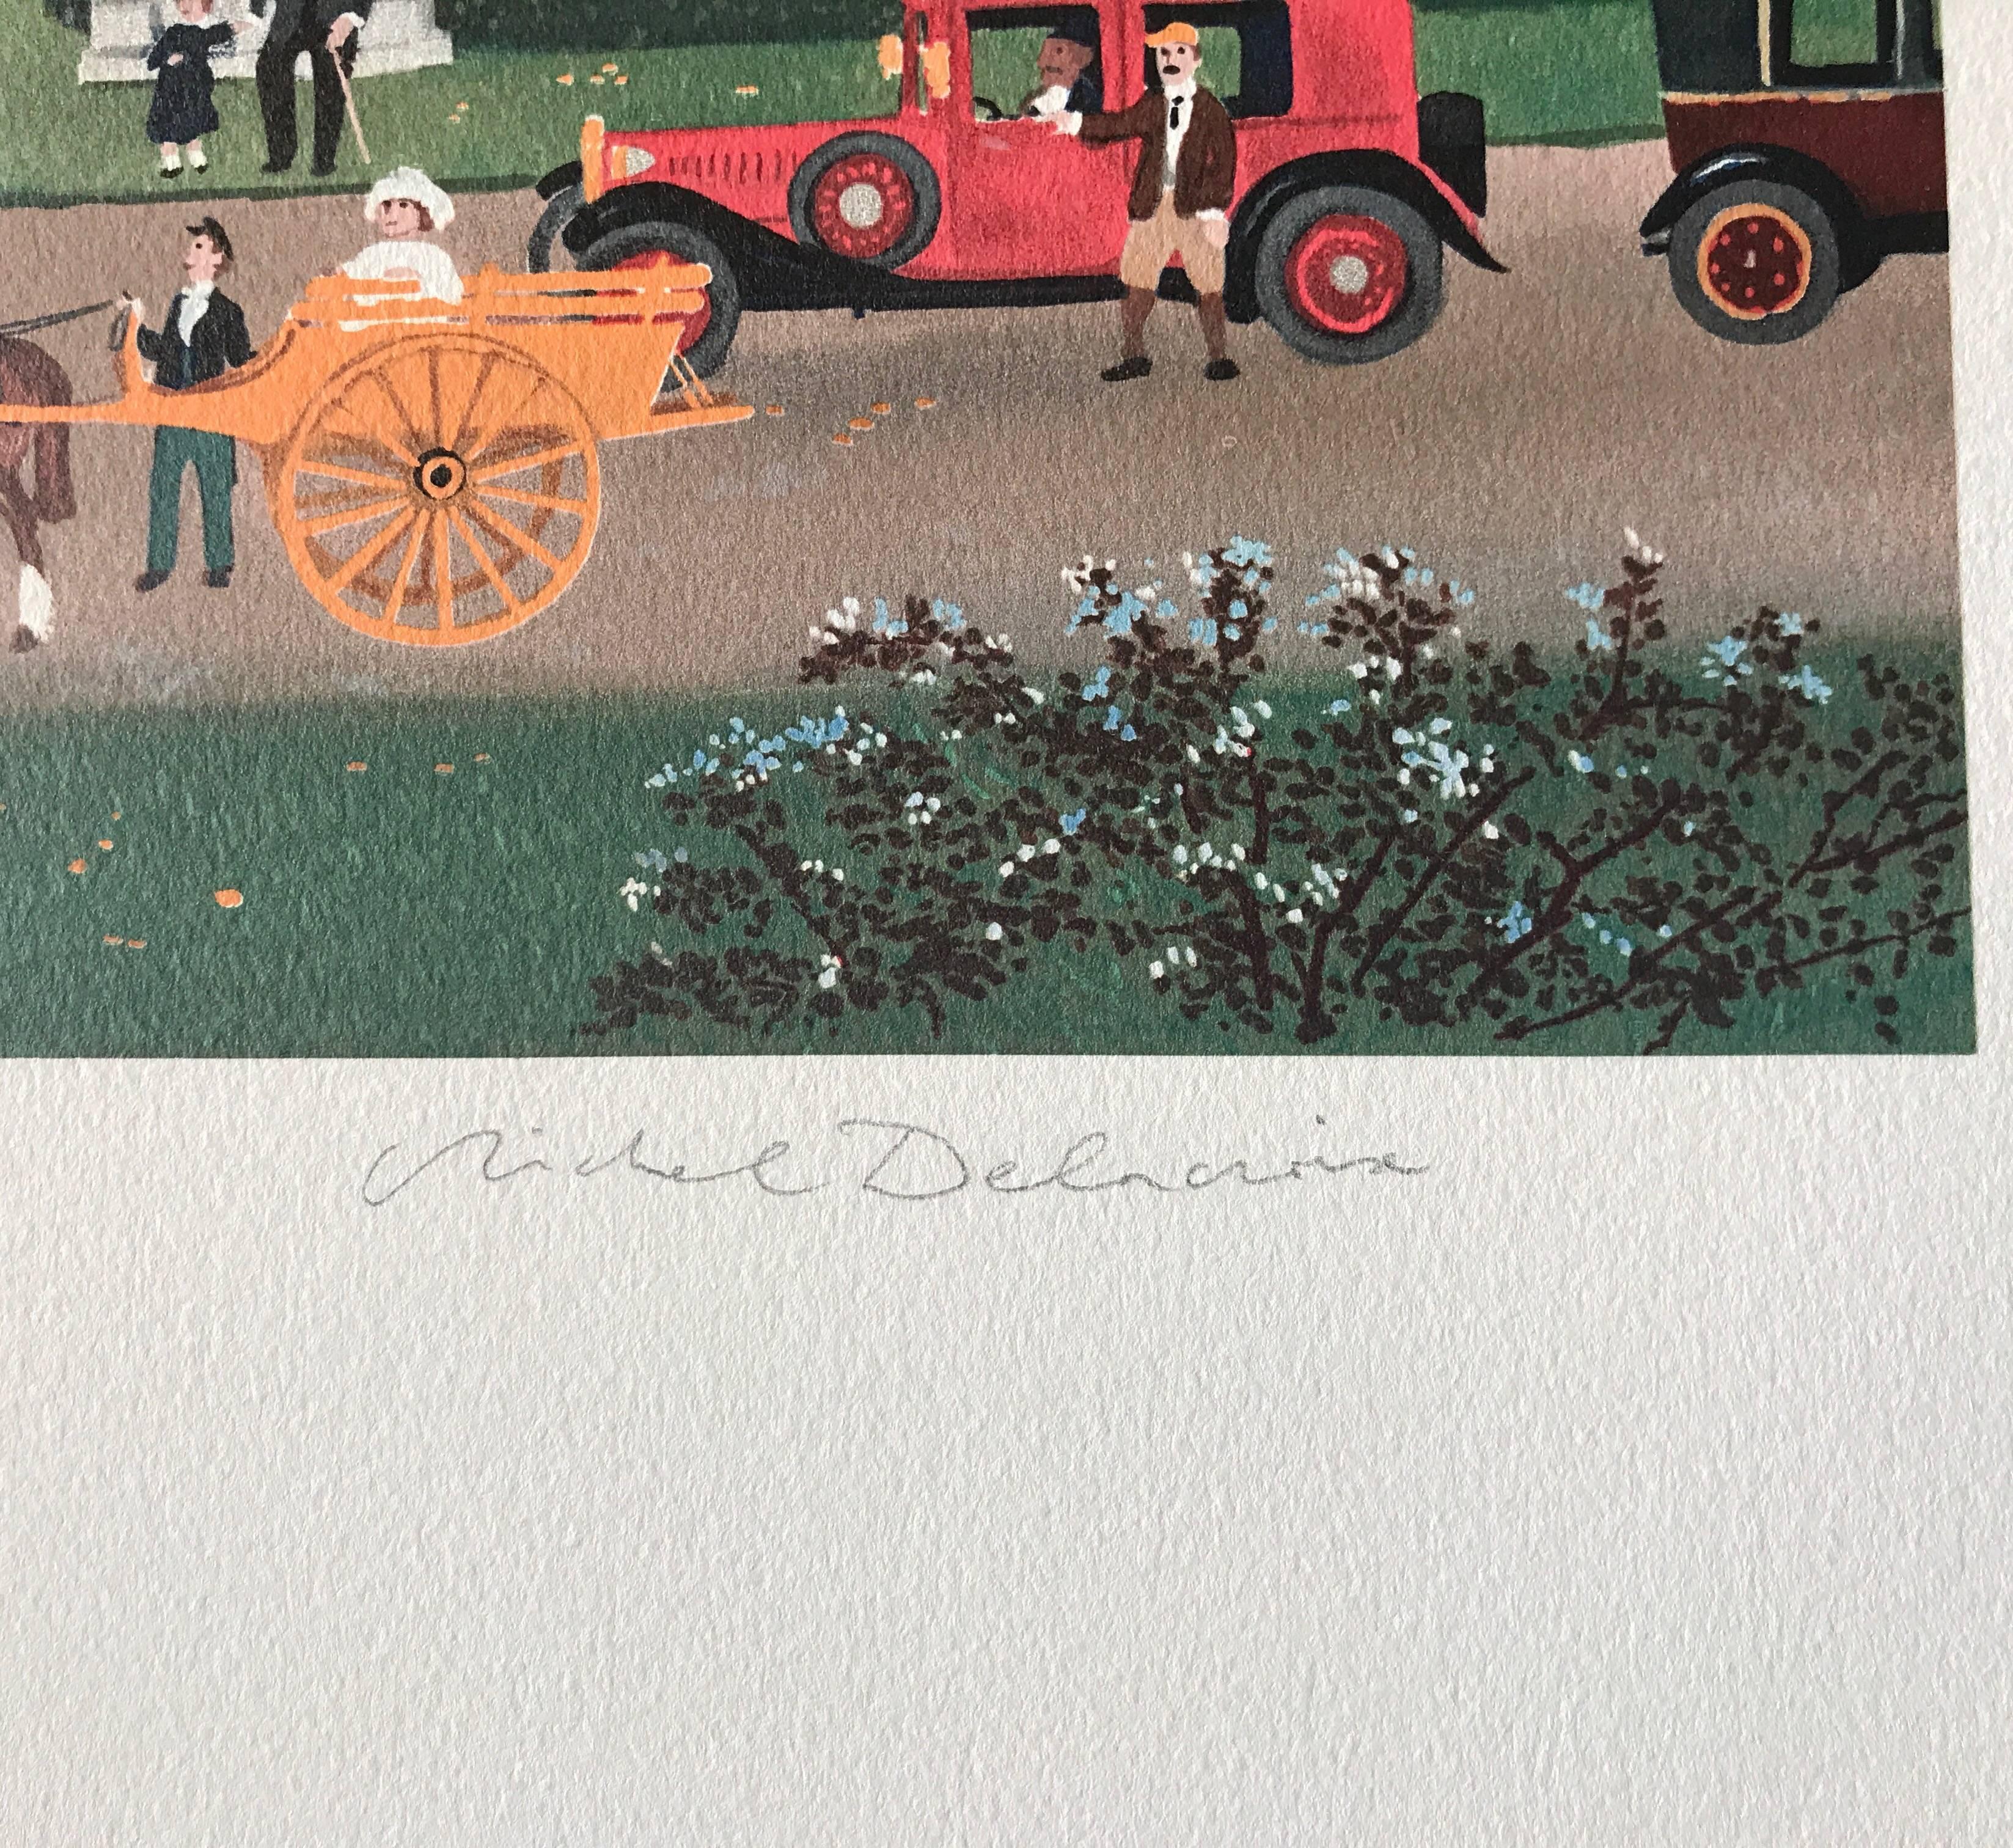 MARIAGE À LA CAMPAGNE Signed Lithograph, French Maison, Romantic Country Wedding For Sale 6